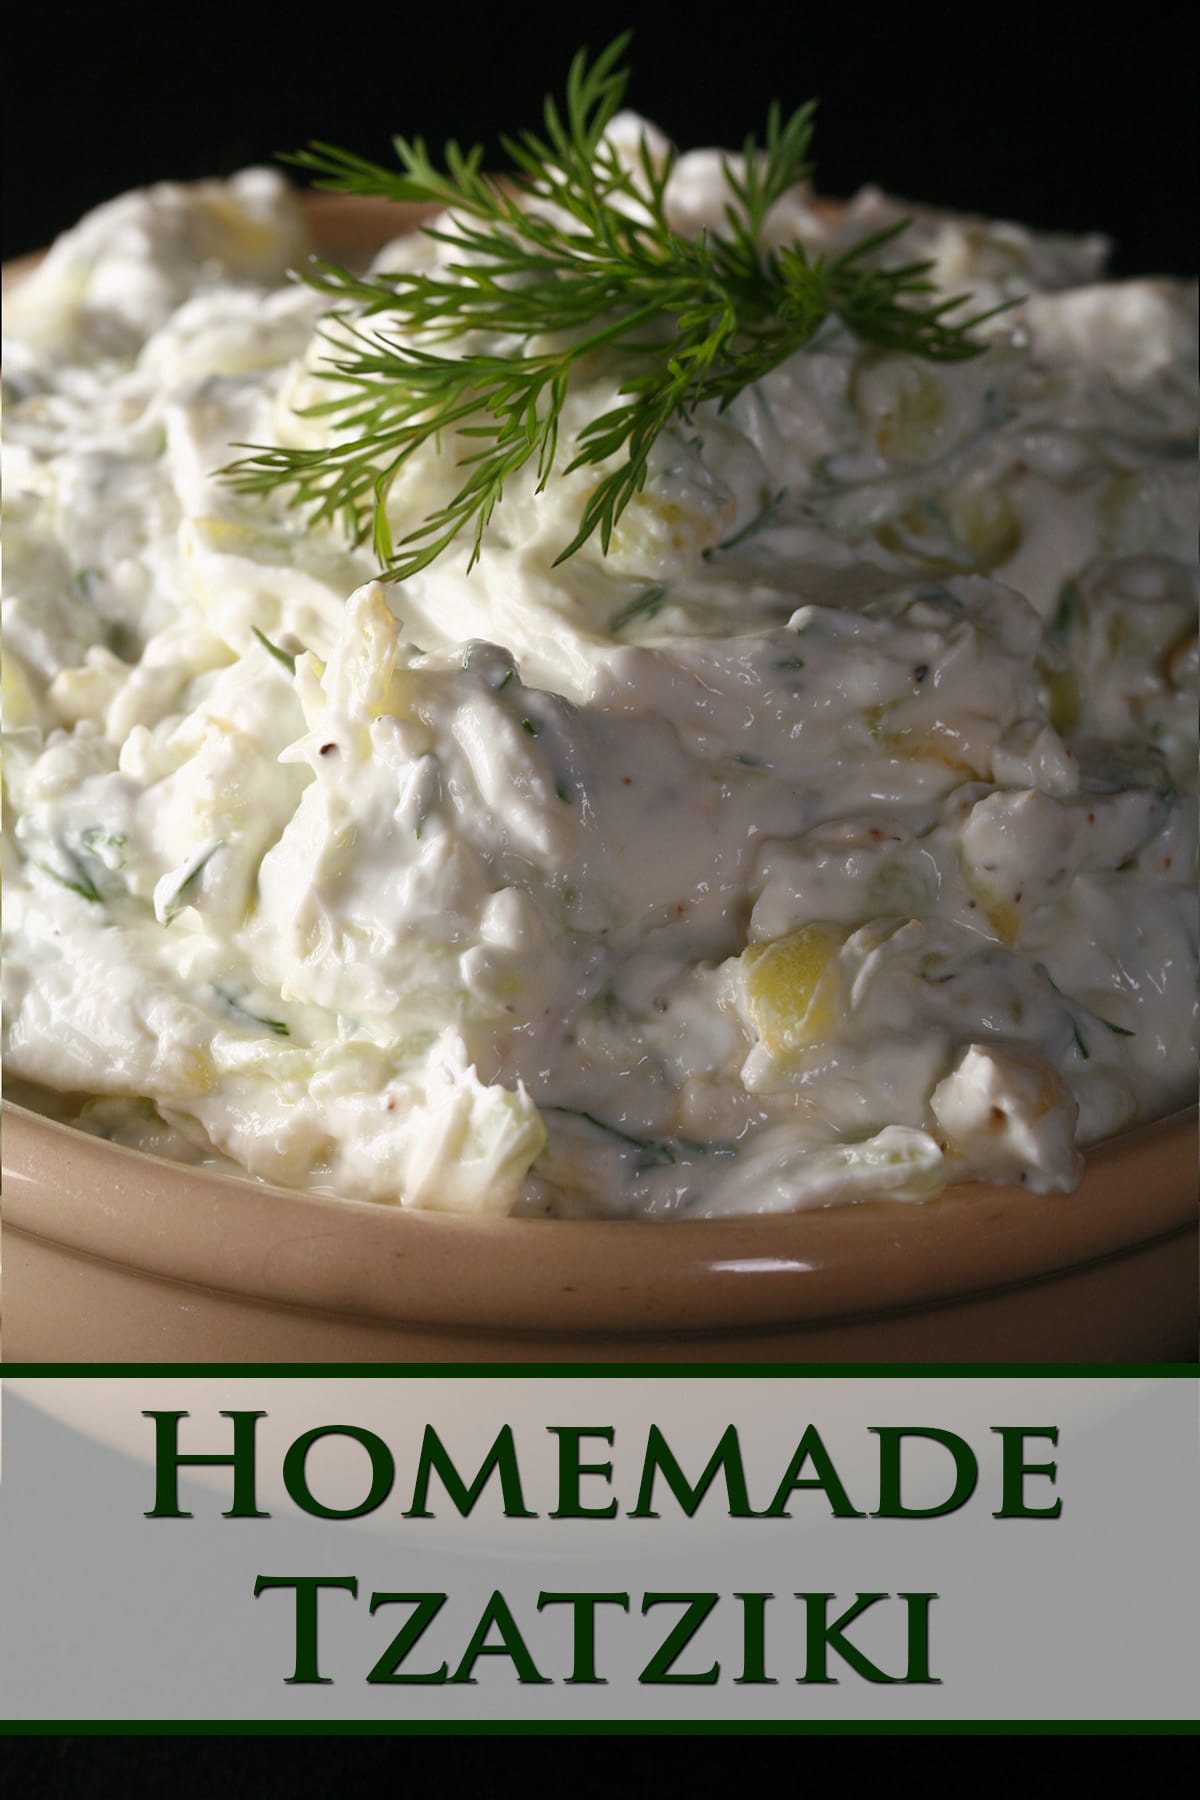 A bowl of thick tzatziki dip, garnished with fresh dill.